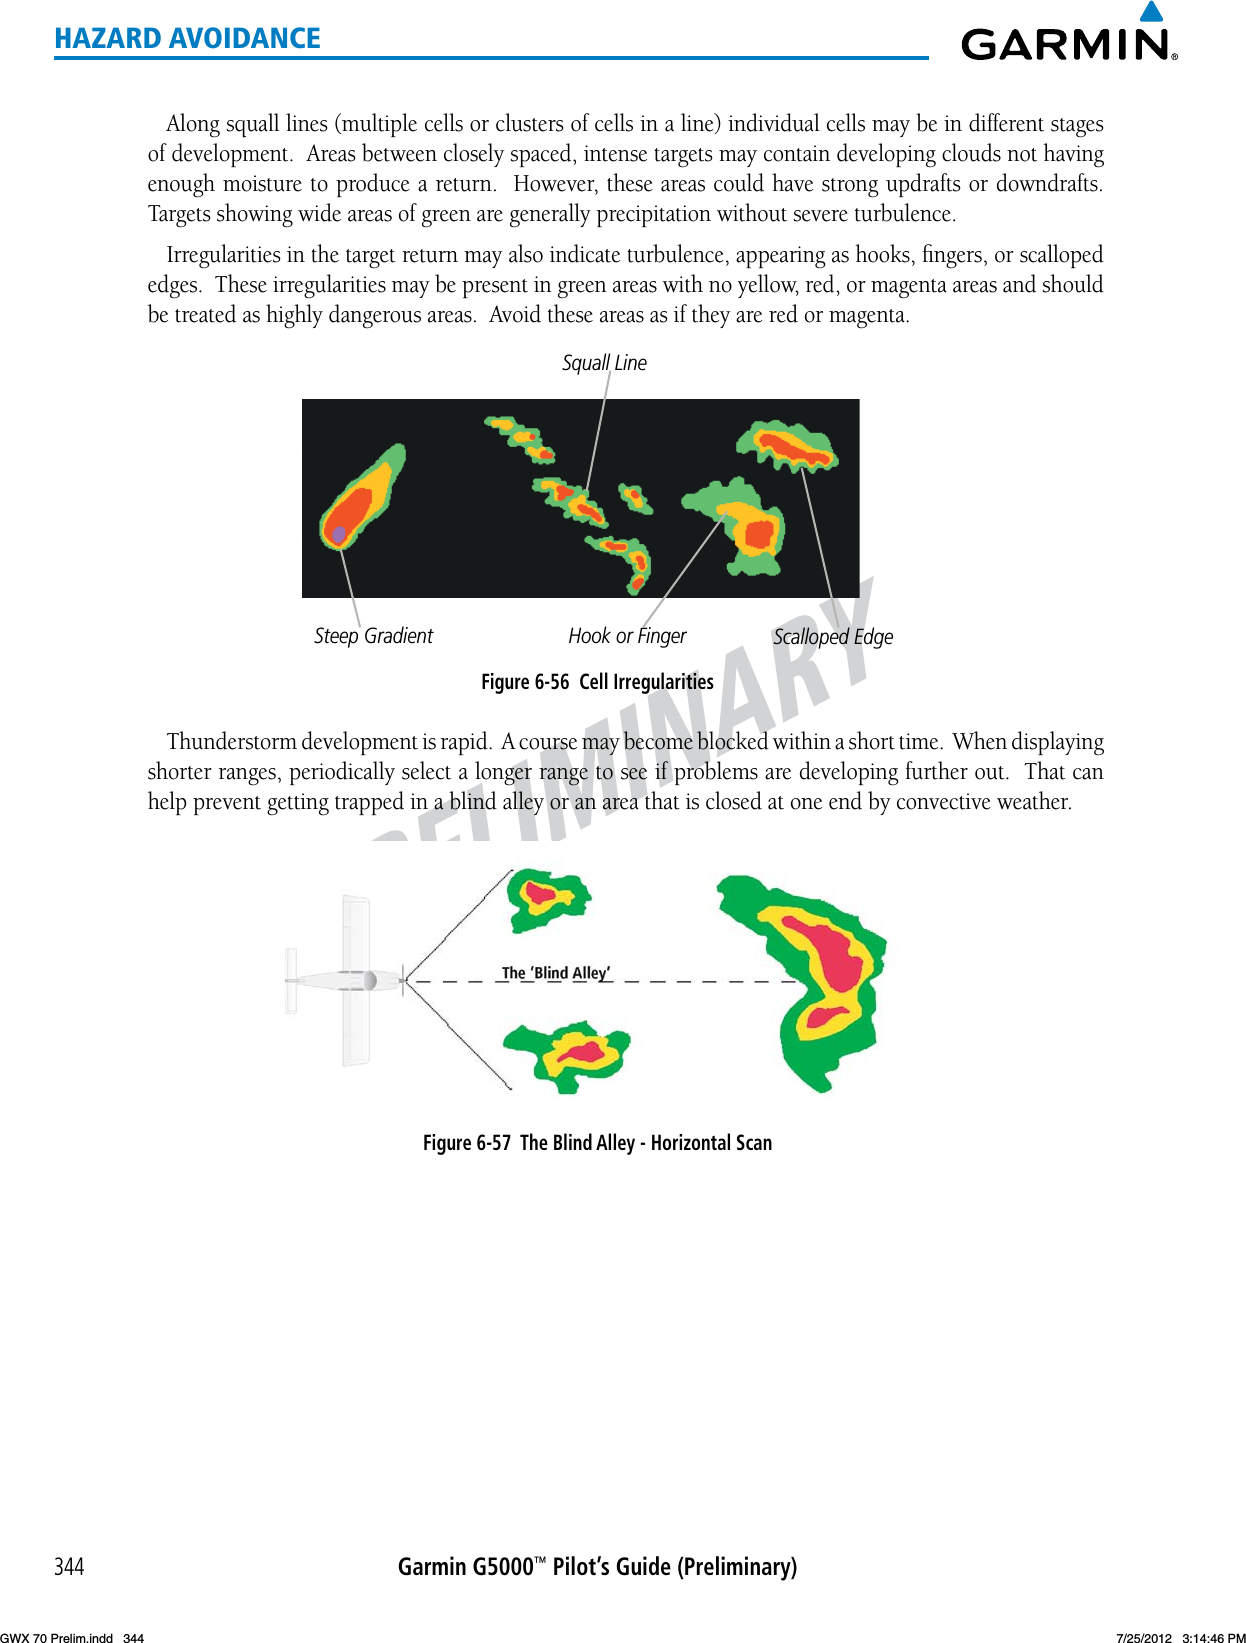 PRELIMINARYGarmin G5000™ Pilot’s Guide (Preliminary)344HAZARD AVOIDANCEAlong squall lines (multiple cells or clusters of cells in a line) individual cells may be in different stages of development.  Areas between closely spaced, intense targets may contain developing clouds not having enoughmoisturetoproduceareturn.However,theseareascouldhavestrongupdraftsordowndrafts.Targets showing wide areas of green are generally precipitation without severe turbulence.  Irregularities in the target return may also indicate turbulence, appearing as hooks, ﬁngers, or scalloped edges.  These irregularities may be present in green areas with no yellow, red, or magenta areas and should be treated as highly dangerous areas.  Avoid these areas as if they are red or magenta.Figure 6-56  Cell IrregularitiesSteep GradientSquall LineHook or Finger Scalloped EdgeThunderstorm development is rapid.  A course may become blocked within a short time.  When displaying shorter ranges, periodically select a longer range to see if problems are developing further out.  That can help prevent getting trapped in a blind alley or an area that is closed at one end by convective weather.Figure 6-57  The Blind Alley - Horizontal ScanGWX 70 Prelim.indd   344 7/25/2012   3:14:46 PM